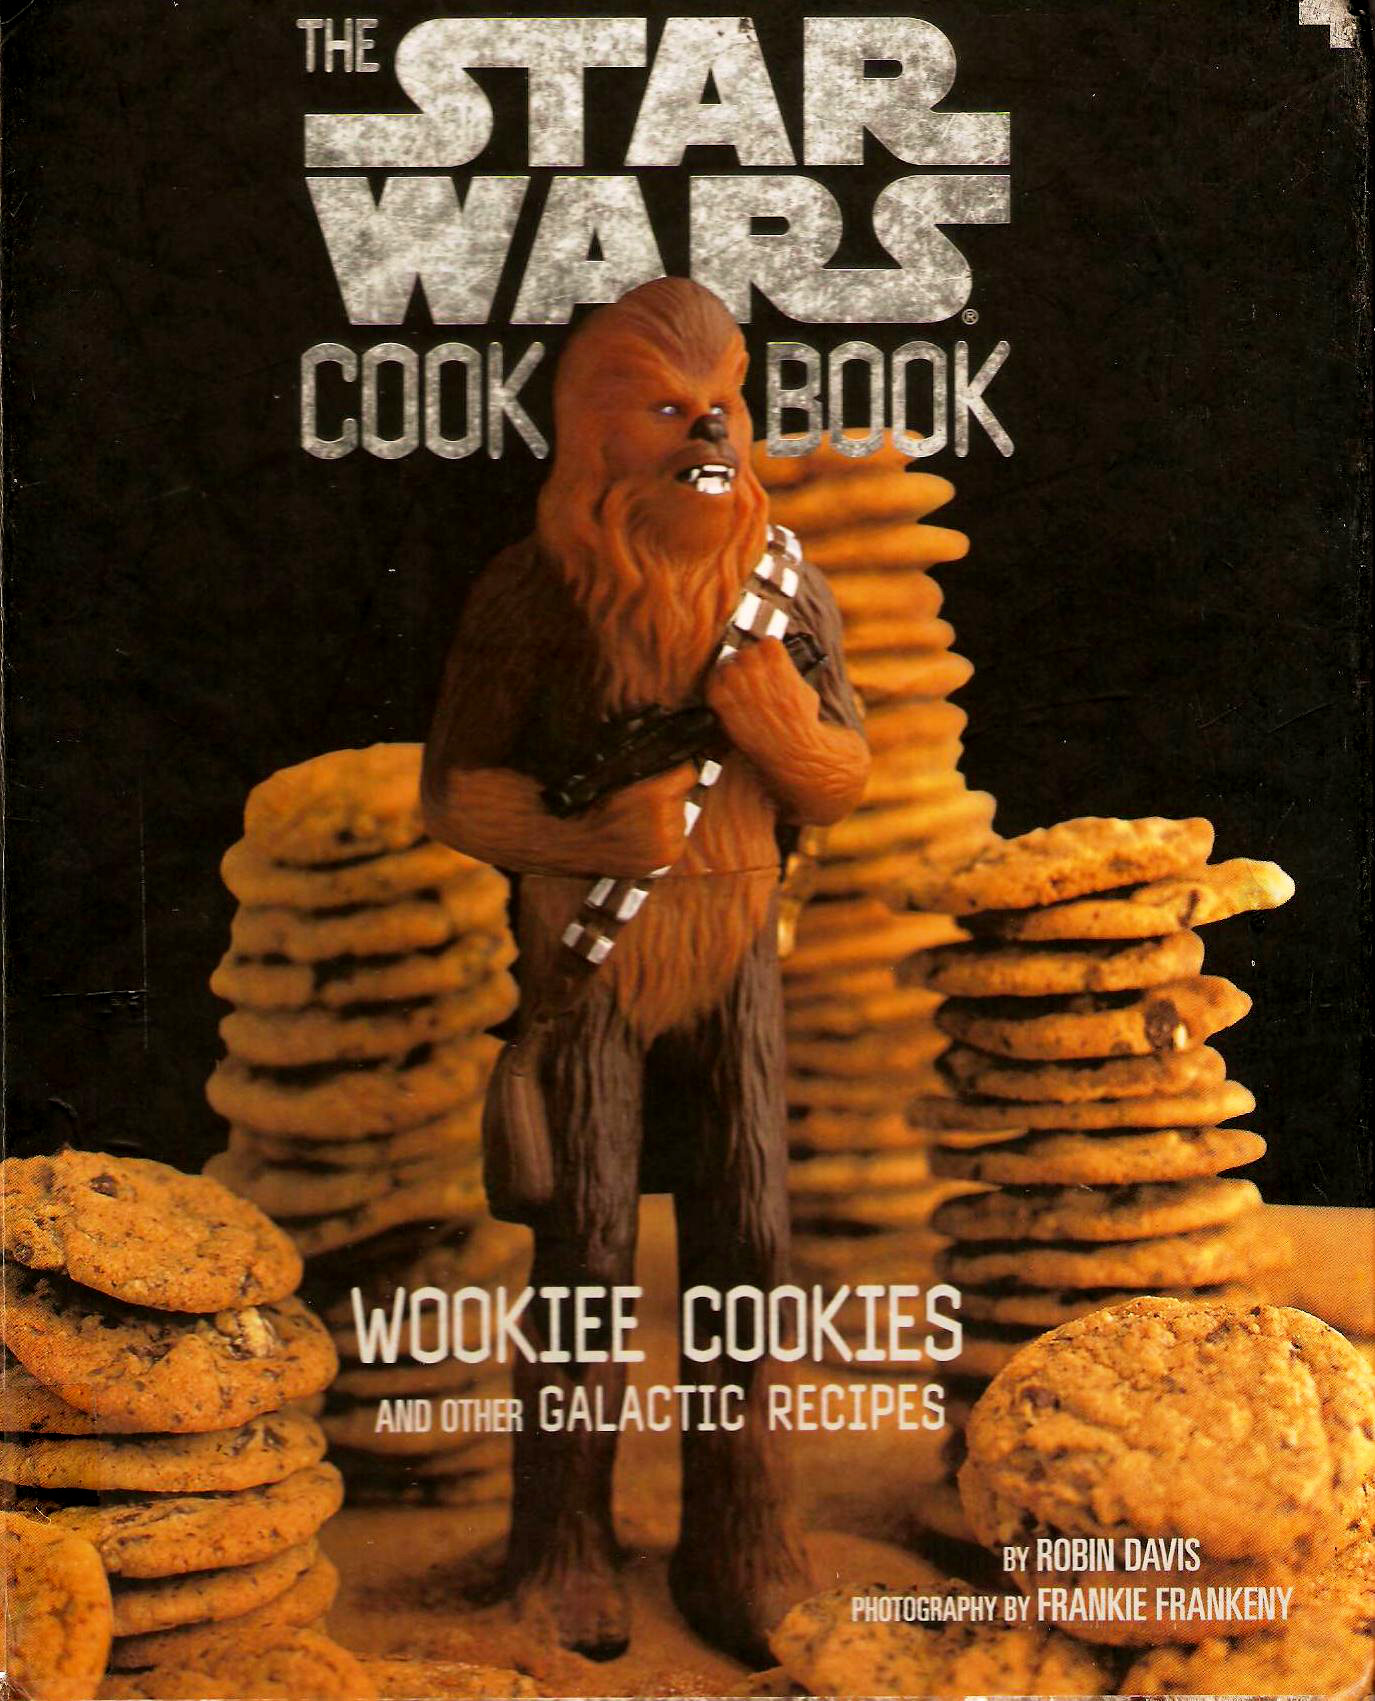 The Star Wars Cookbook: Wookie Cookies and Other Galactic Recipes (1998) Cover